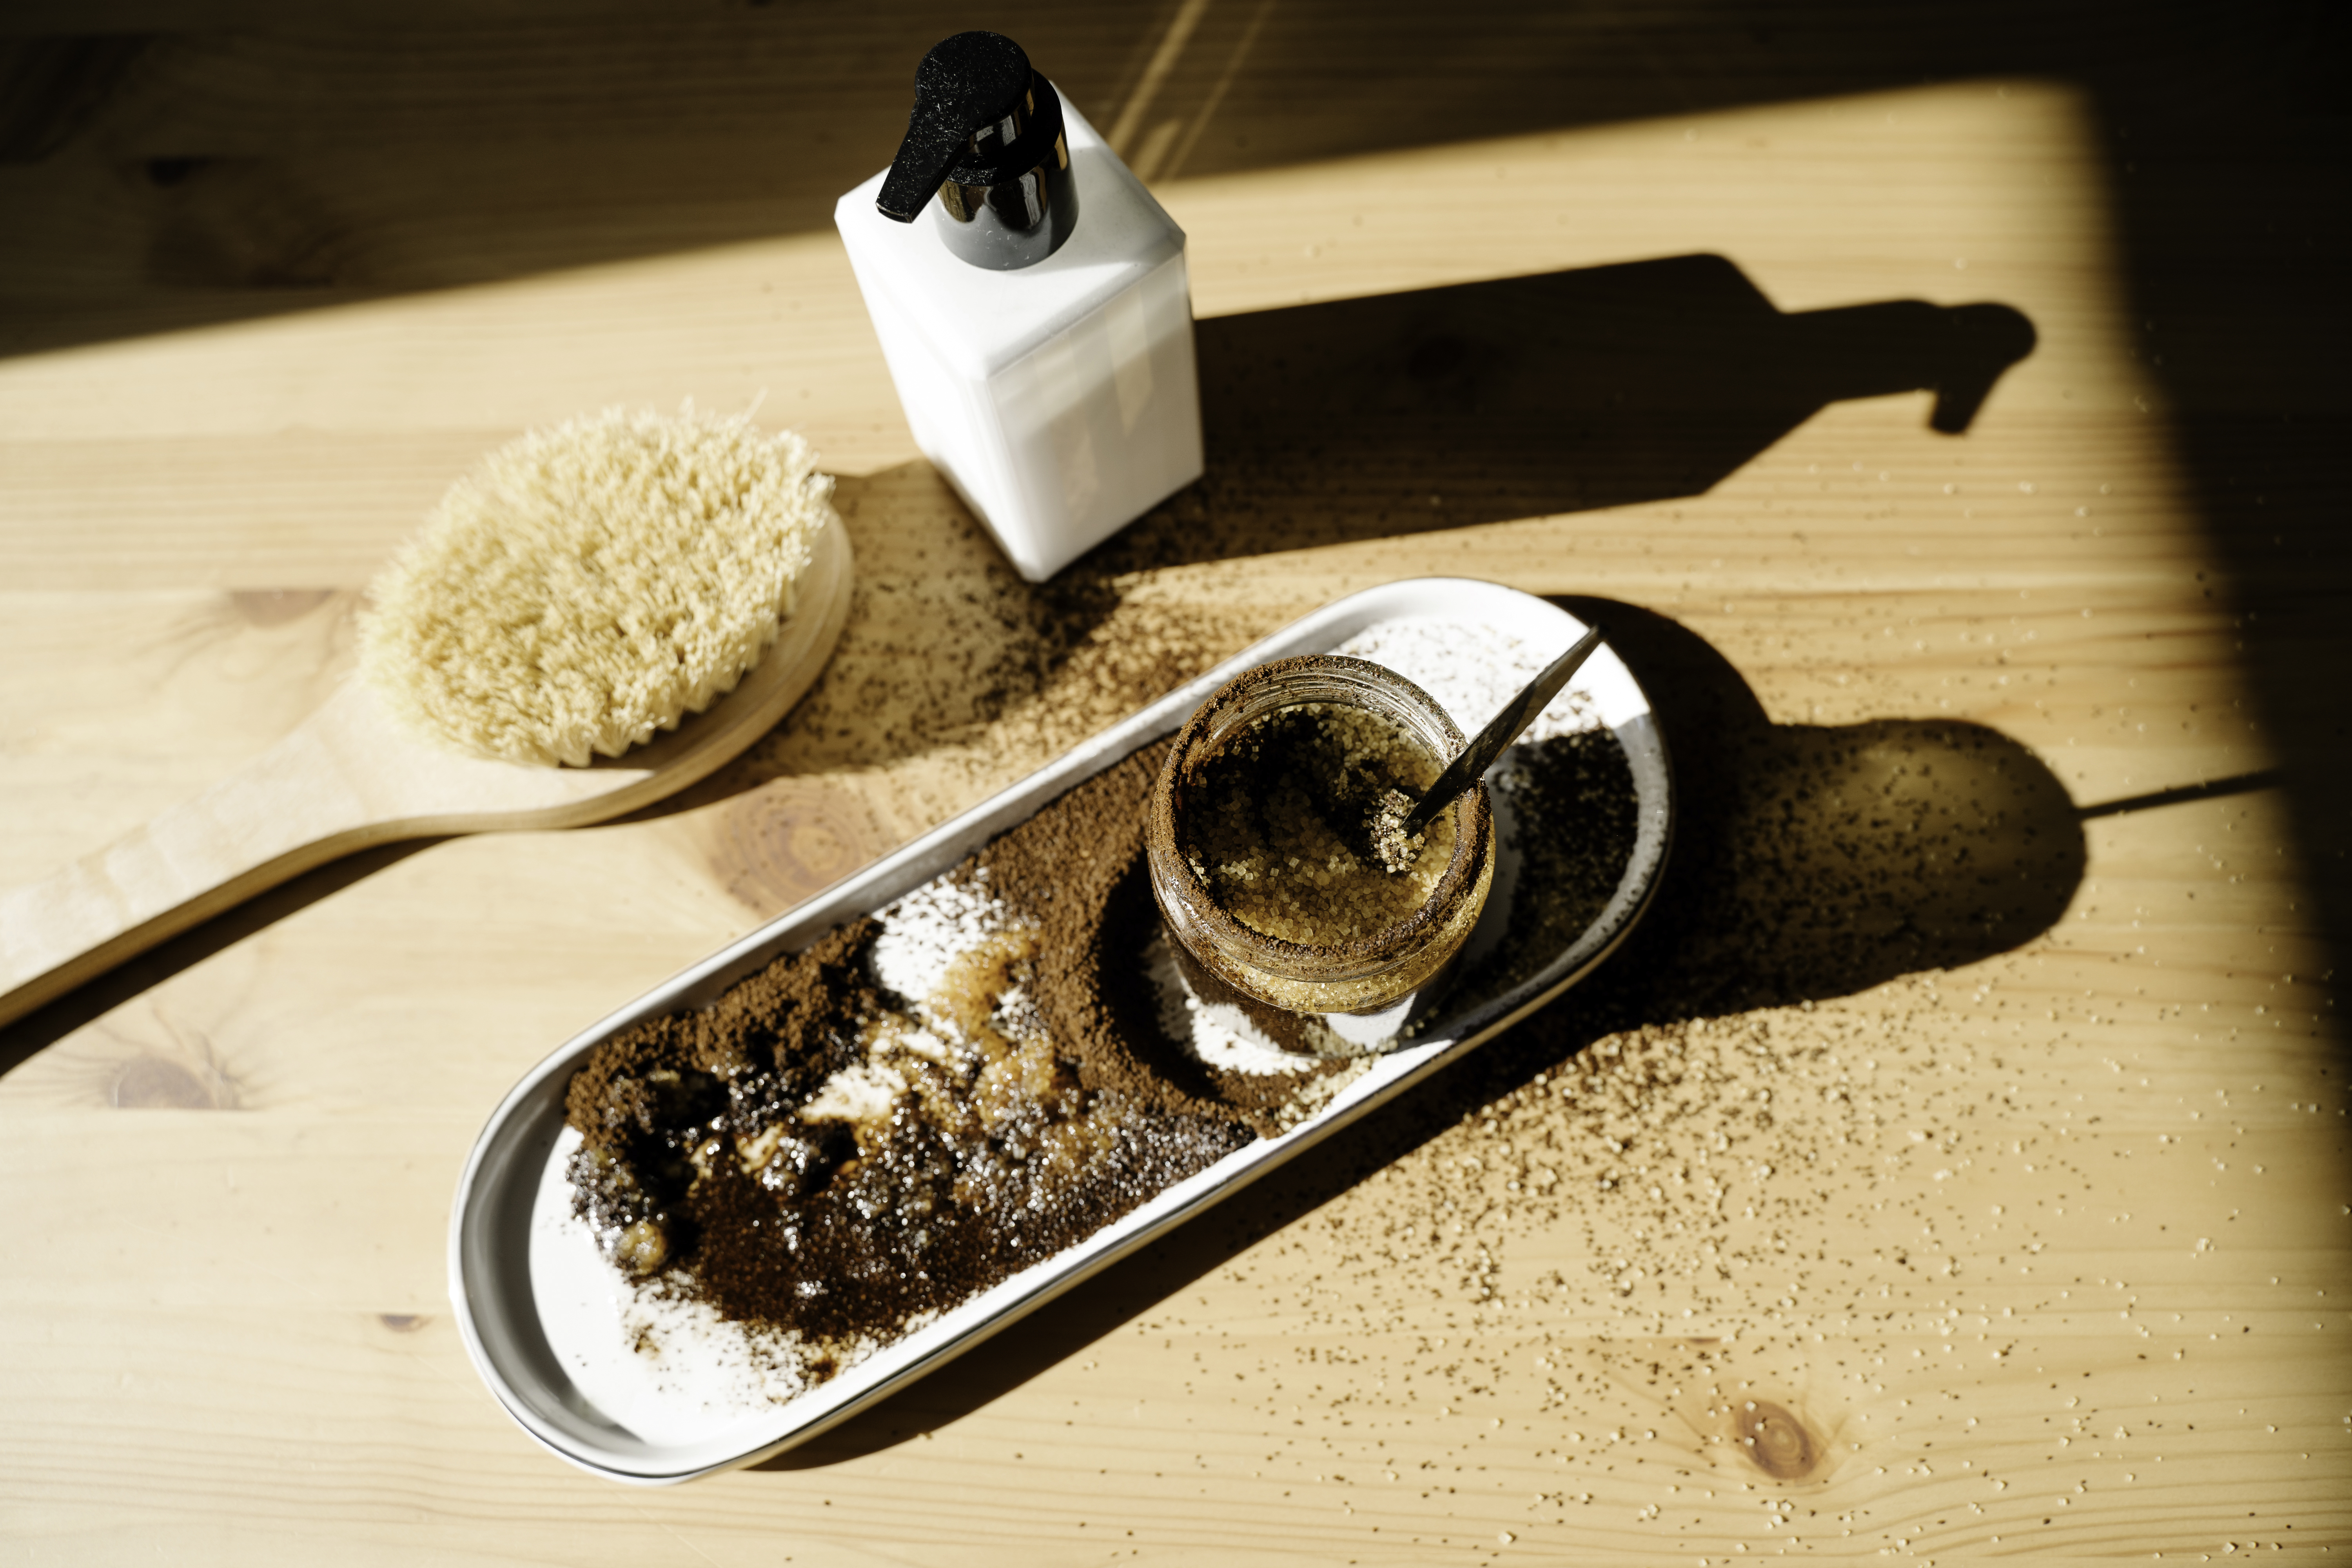 The ingredients necessary for a homemade coffee scrub, laid out on a wooden tables.